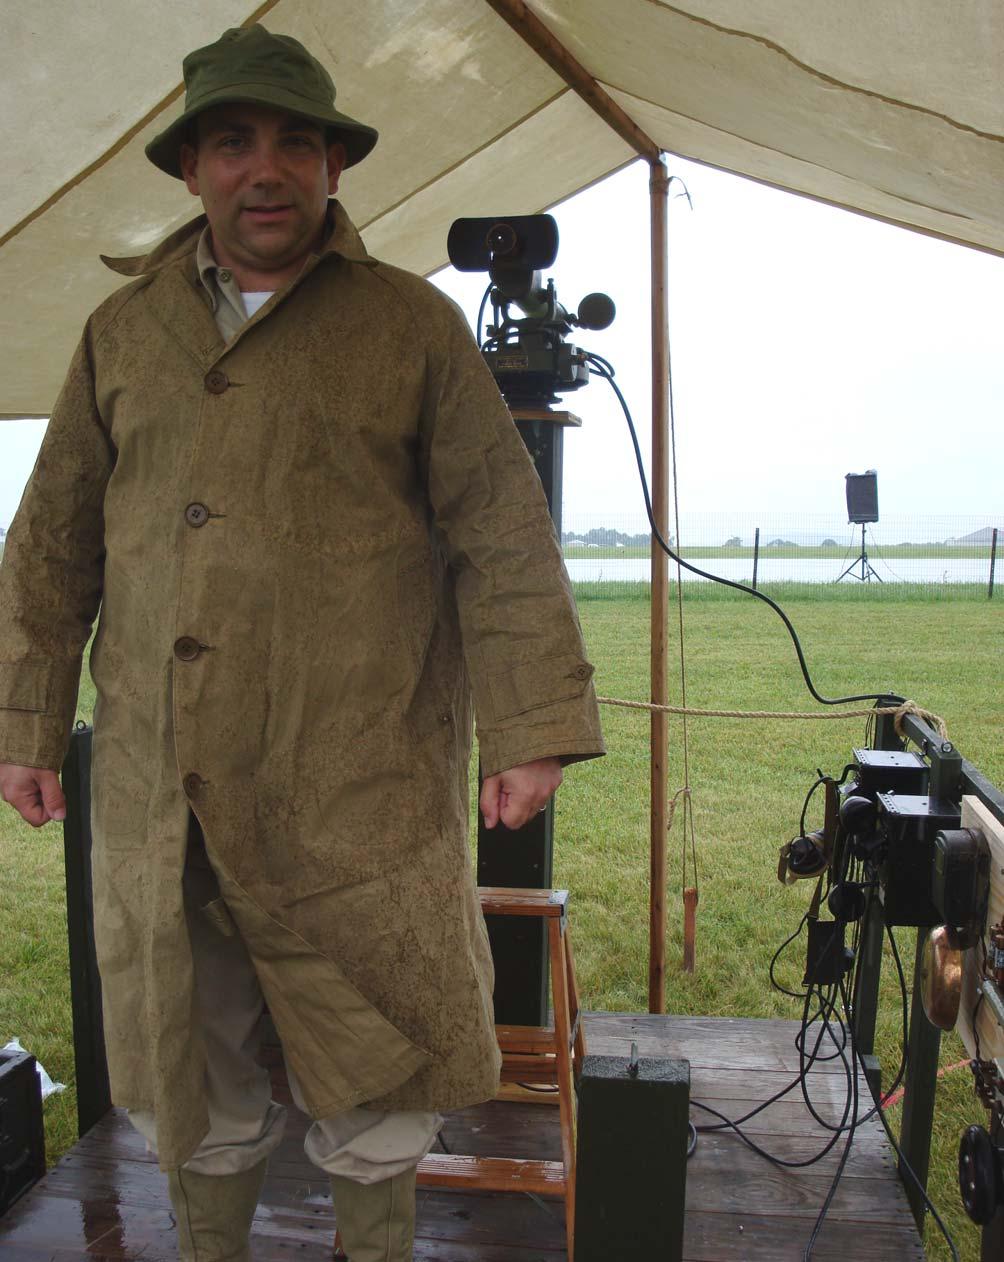 During the rain on Friday, we found our new setup for the M1910 Azimuth instrument was quite useful.